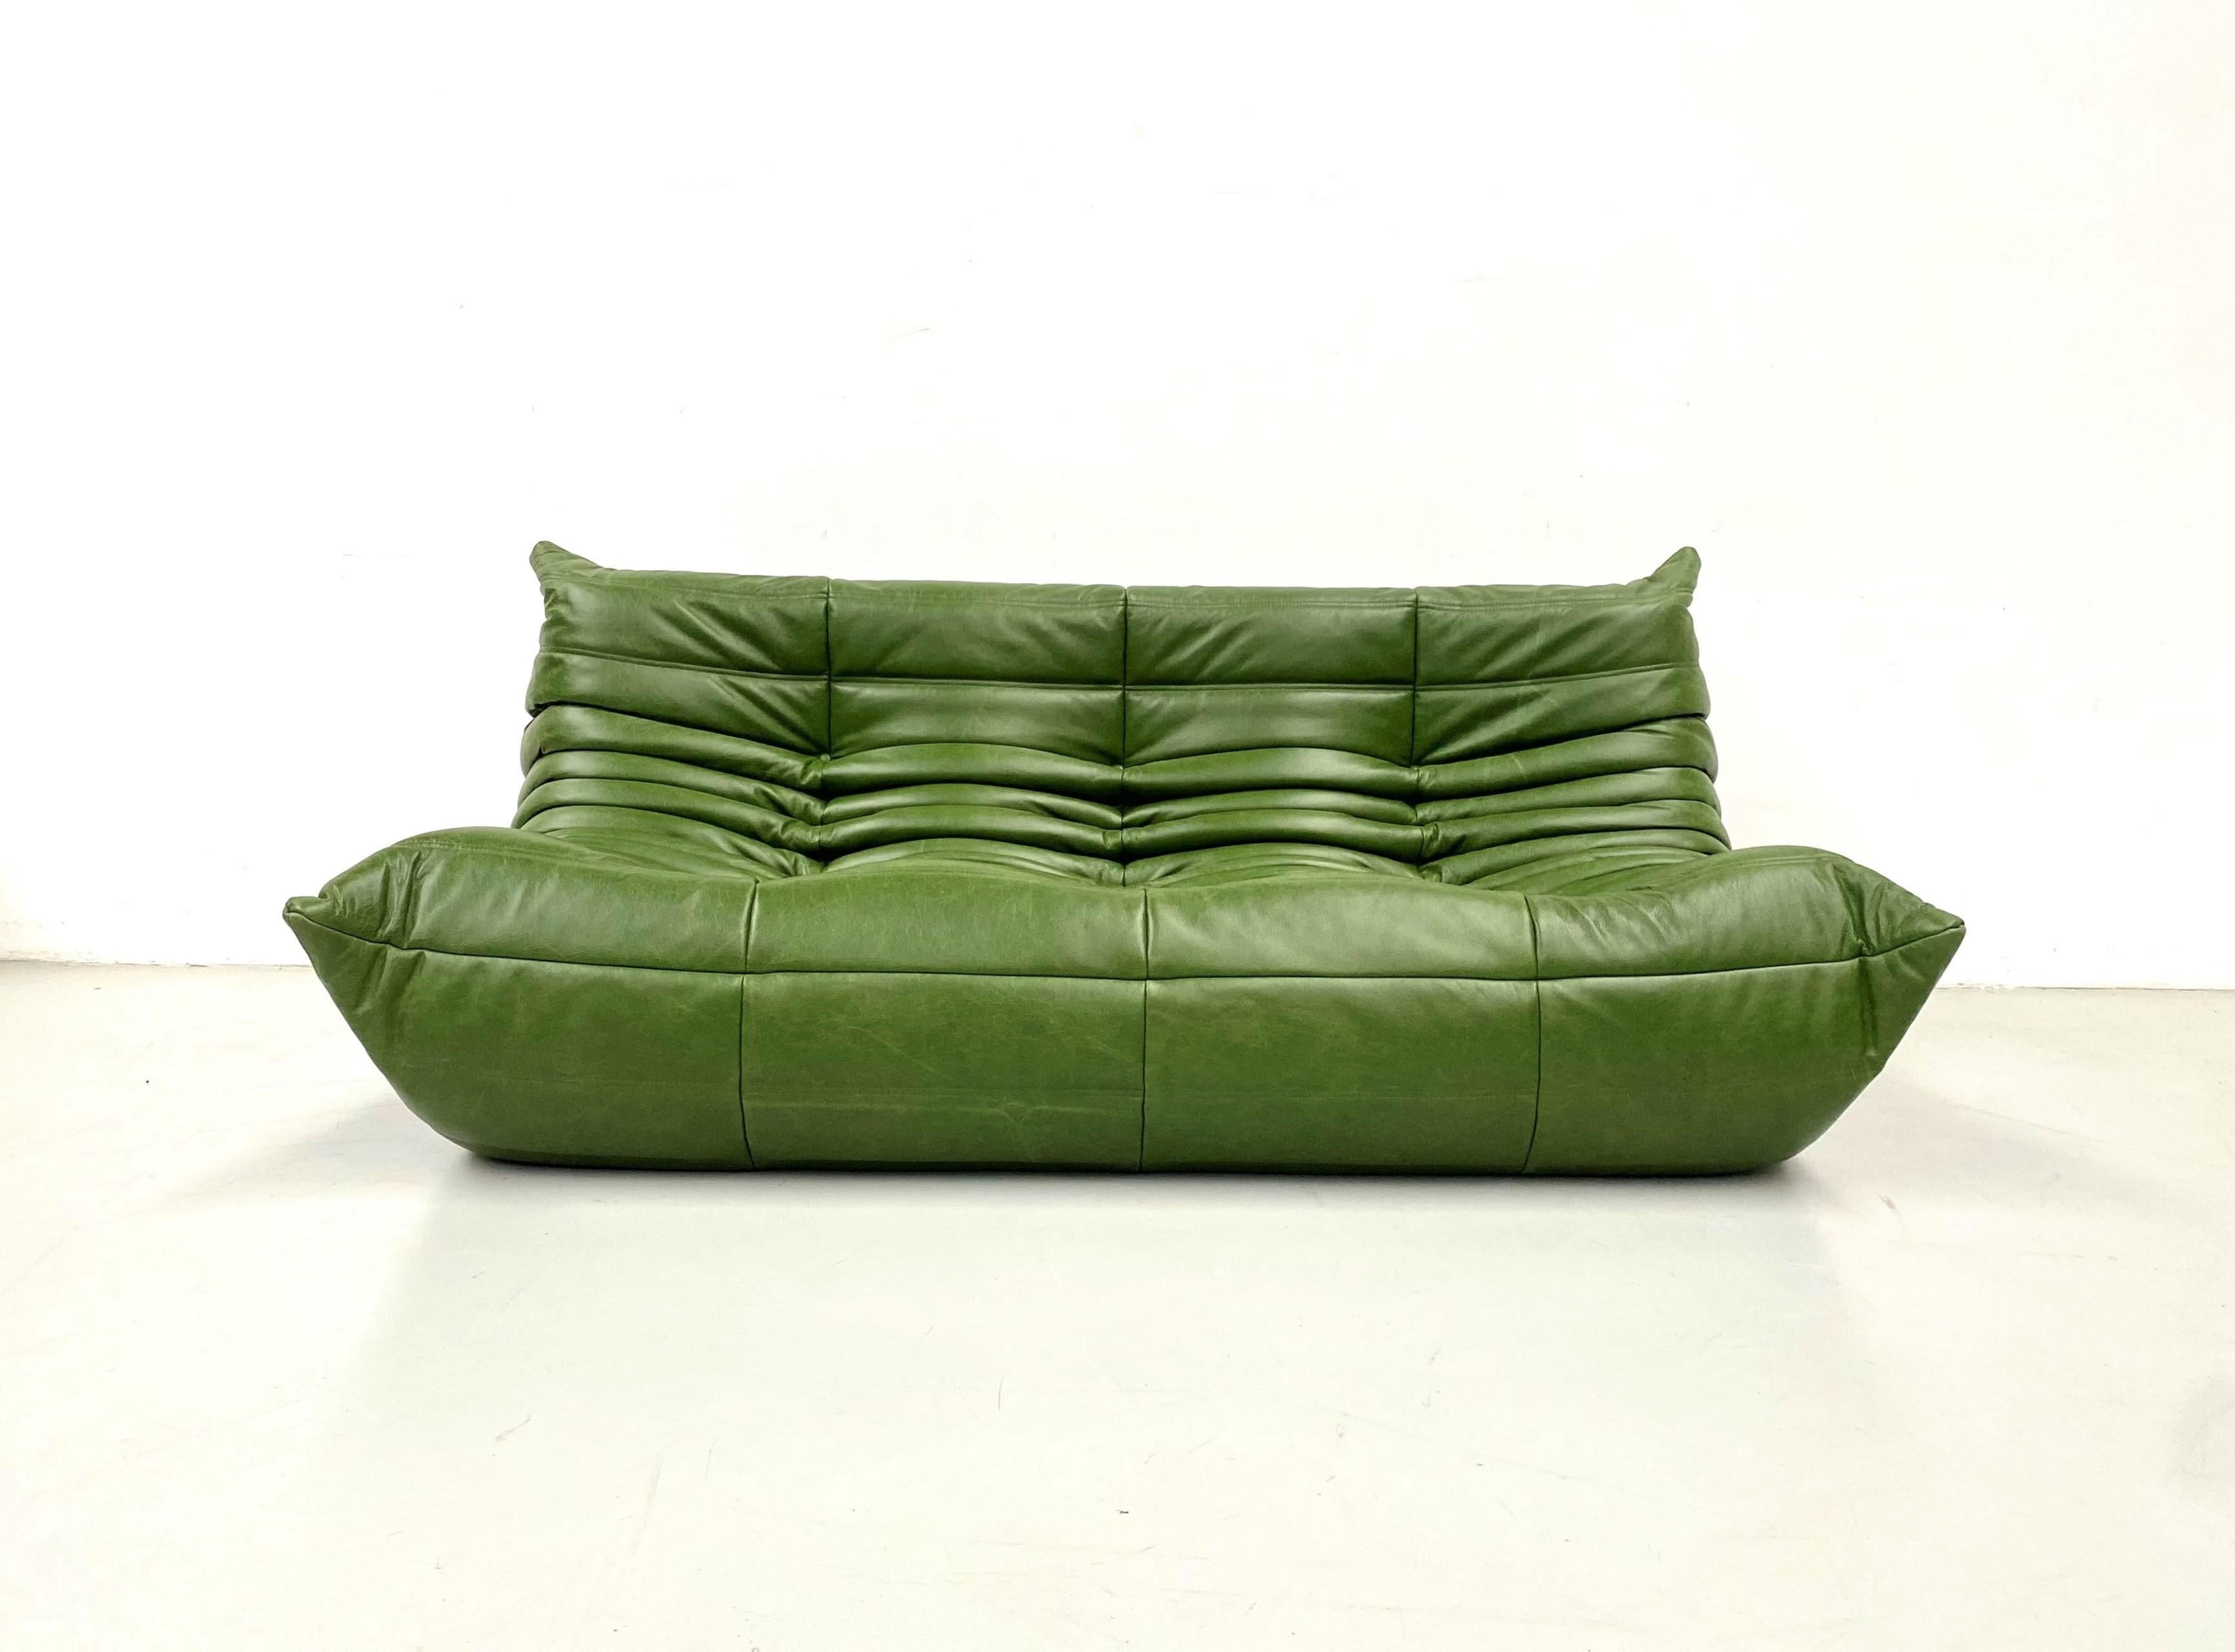 Michel Ducaroy designed the Togo in 1973 for Ligne Roset. This design is over 40 years old but still is until today very popular. The Togo is also the first piece of furniture that's made totally of 5 different densities from foam.